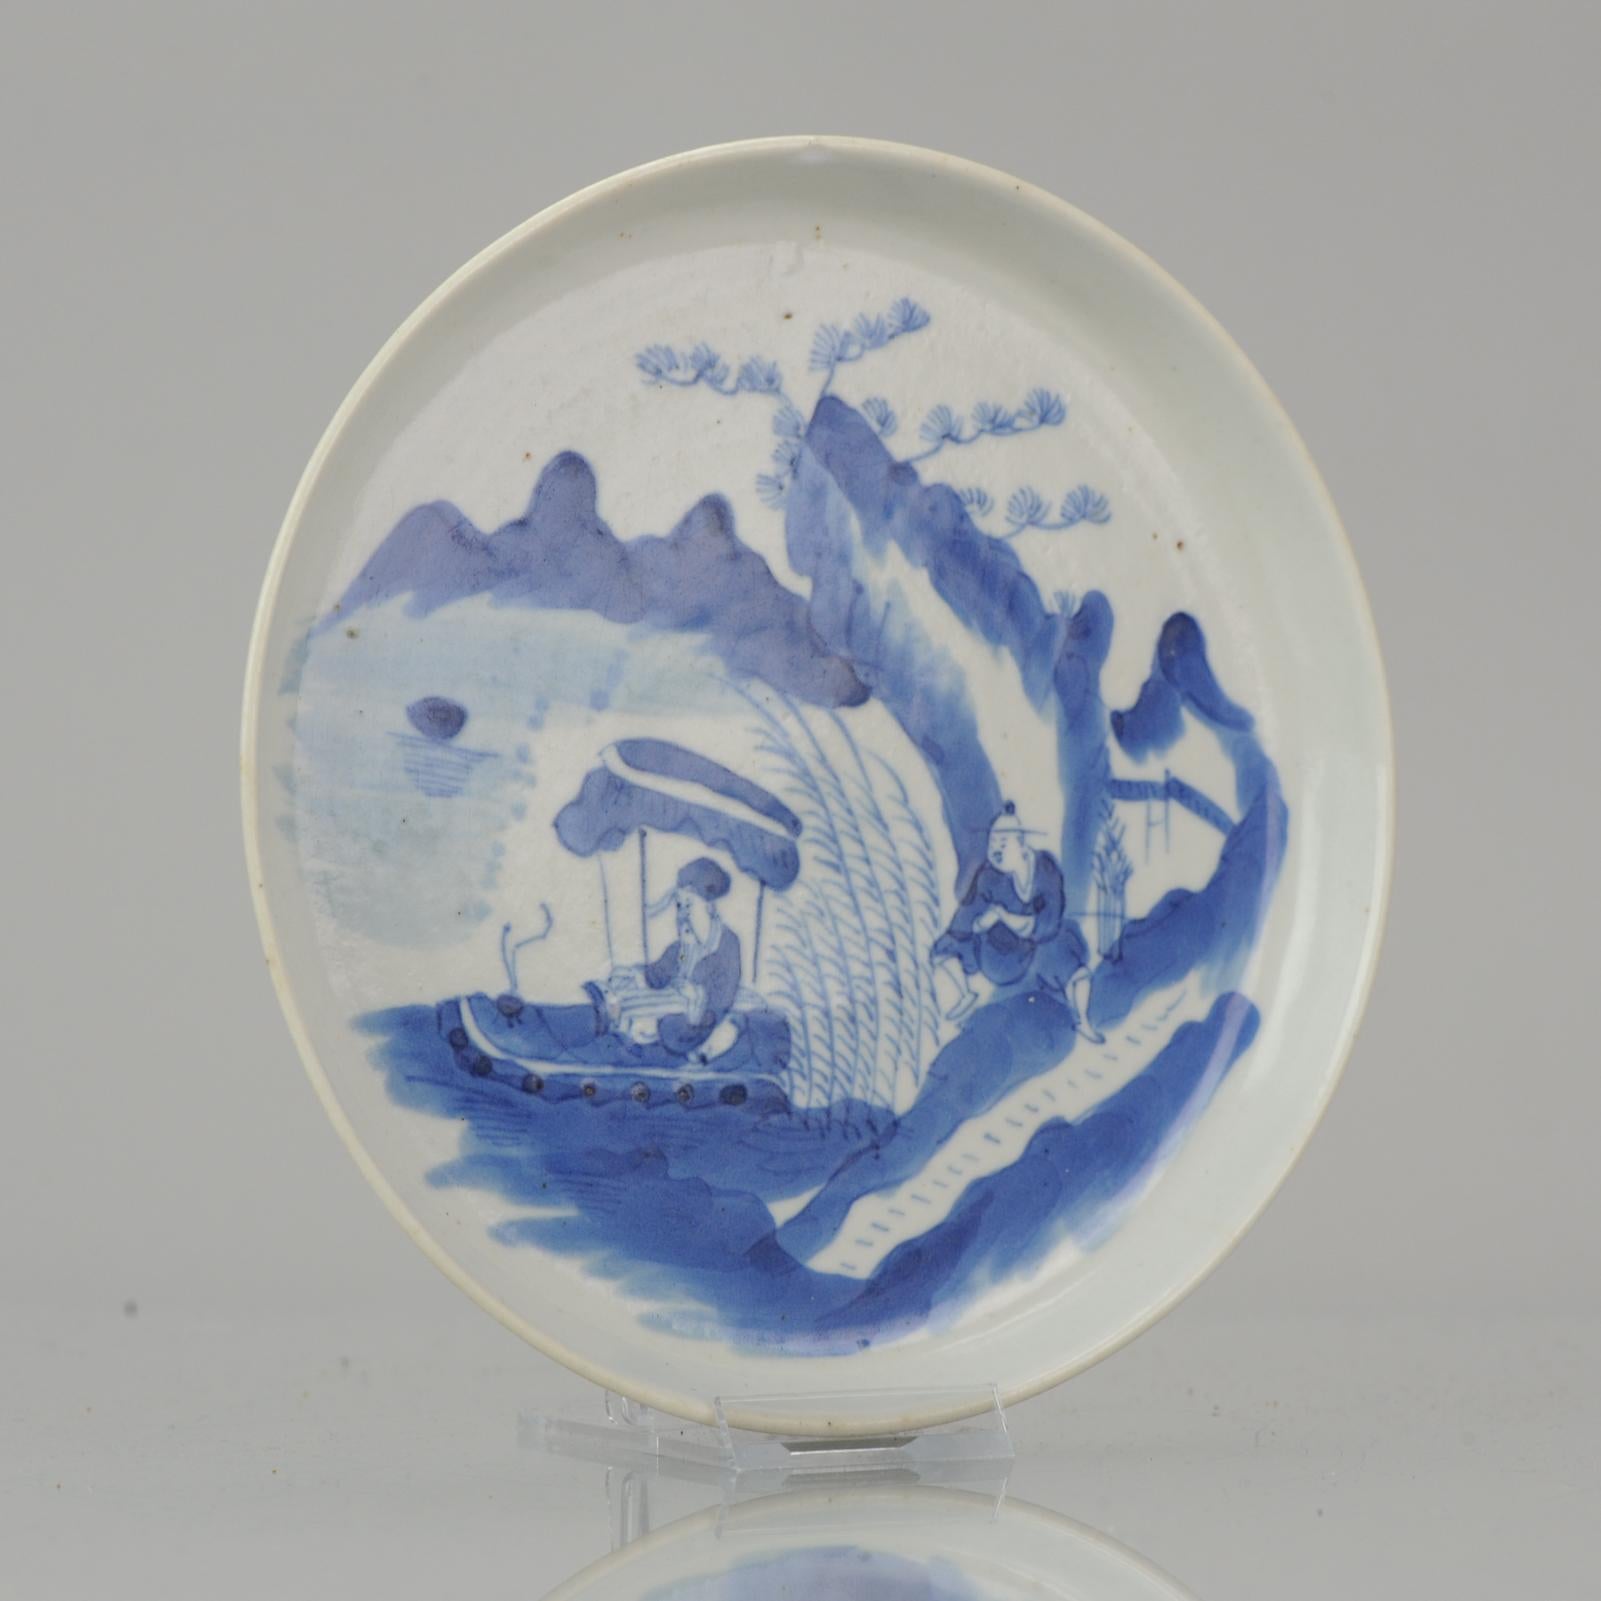 Description
A top quality dish of Bleu de Hue porcelain. The interior painted with a scene from 'Ode to the Red Cliff' through a mountainous riverscape. China, 19th century. For the Vietnamese market

Marked base.

Bleu de Hue
Chinese blue and